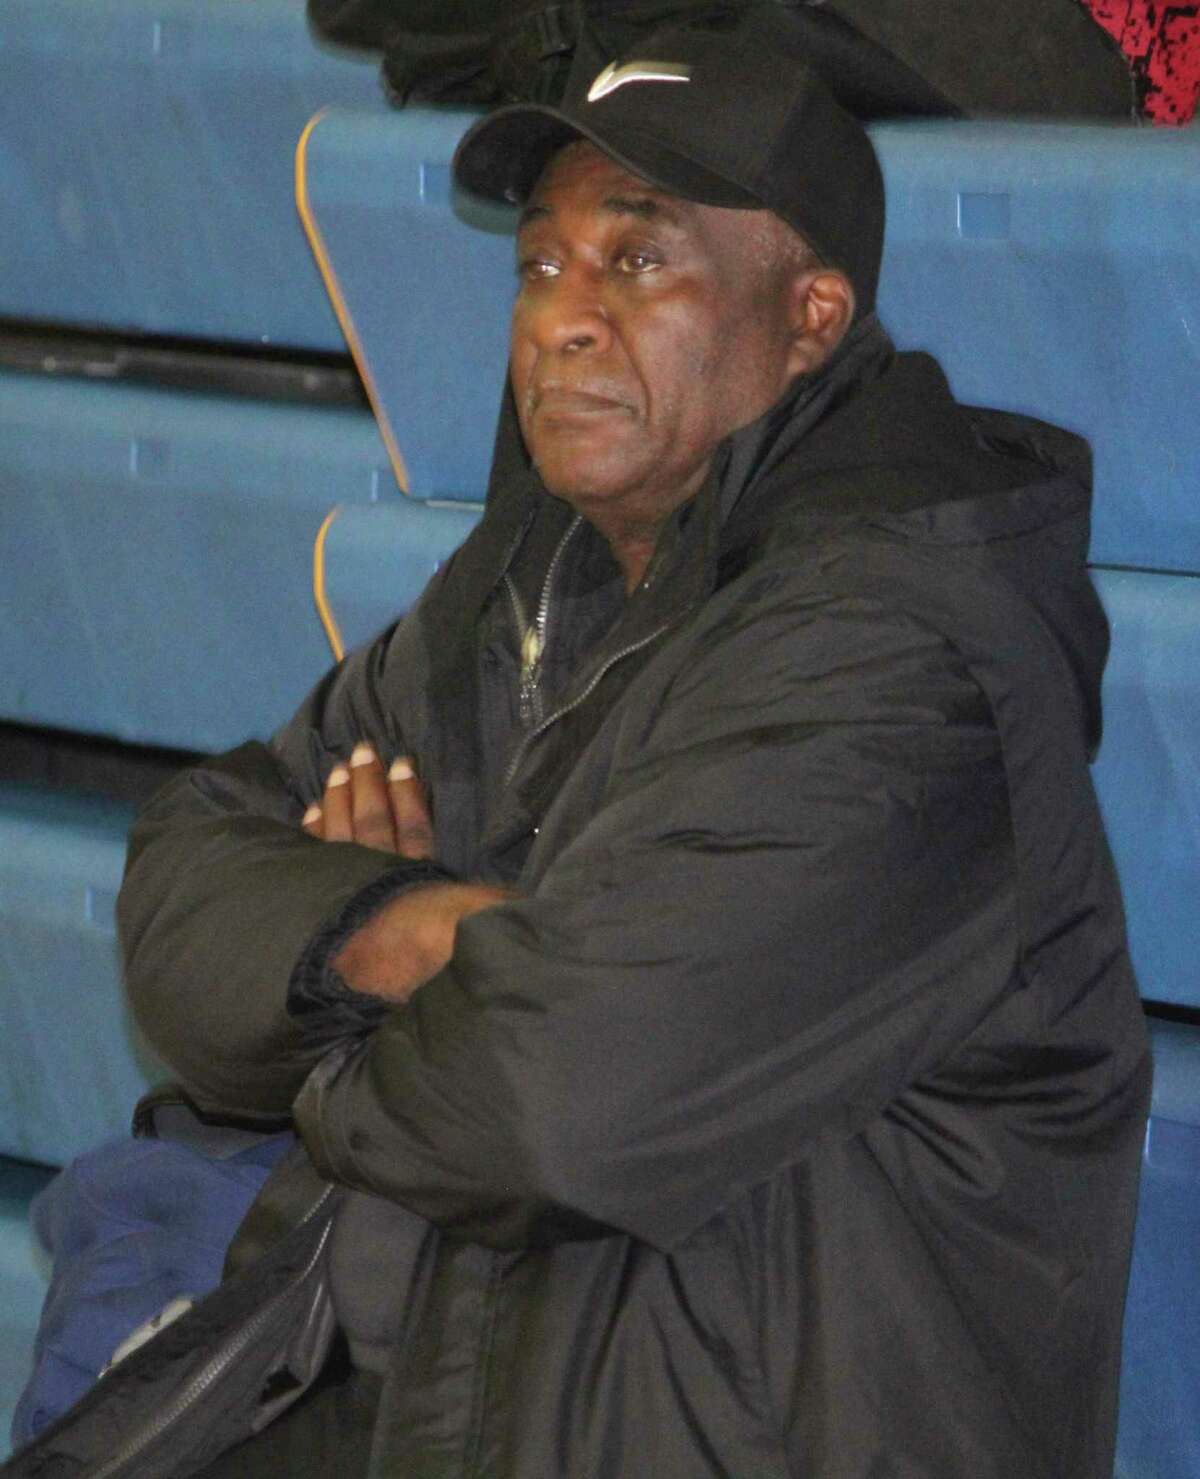 Abe Williams is a long-time coach and former athletic director at Baldwin. (Star file photo)